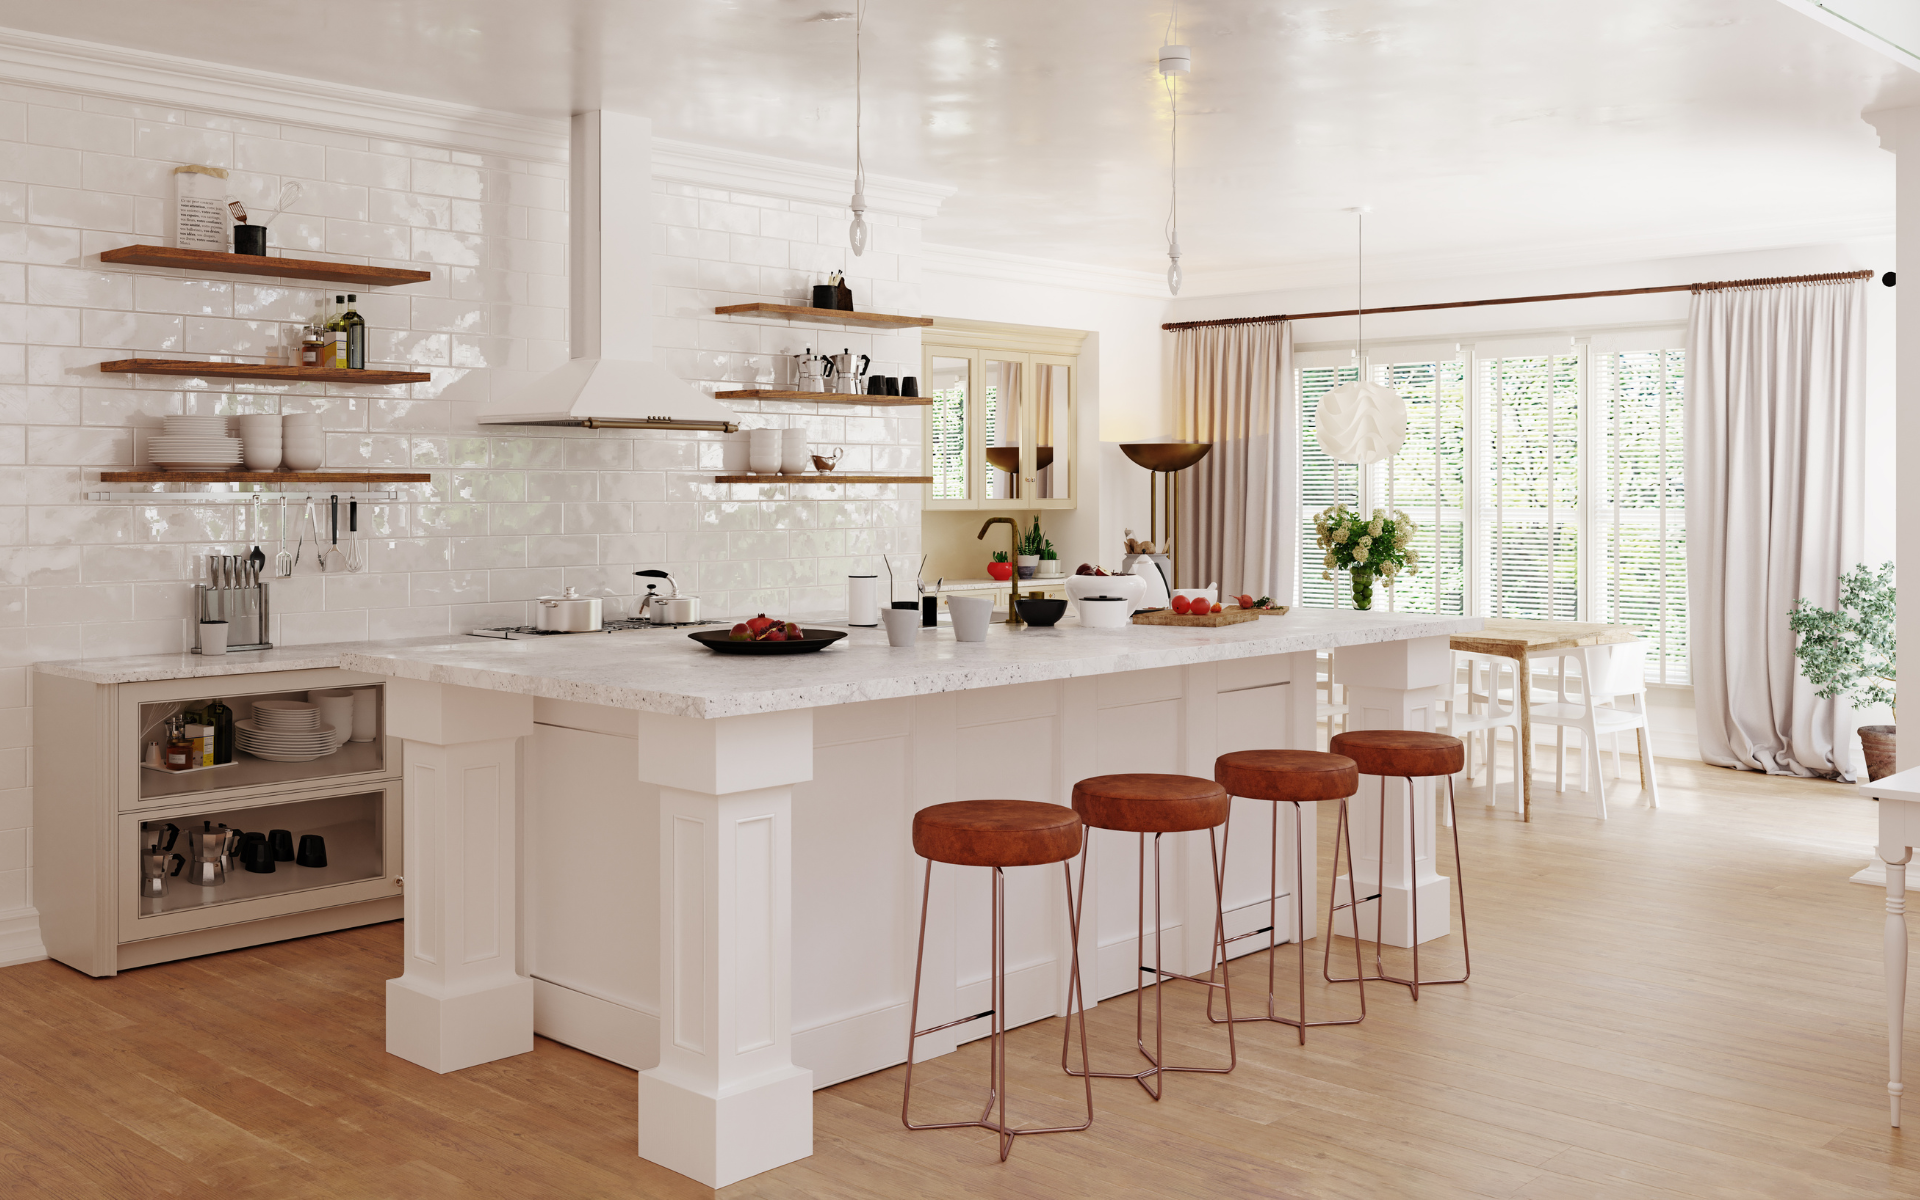 Spacious kitchen with white cabinets, open shelving, and white countertop